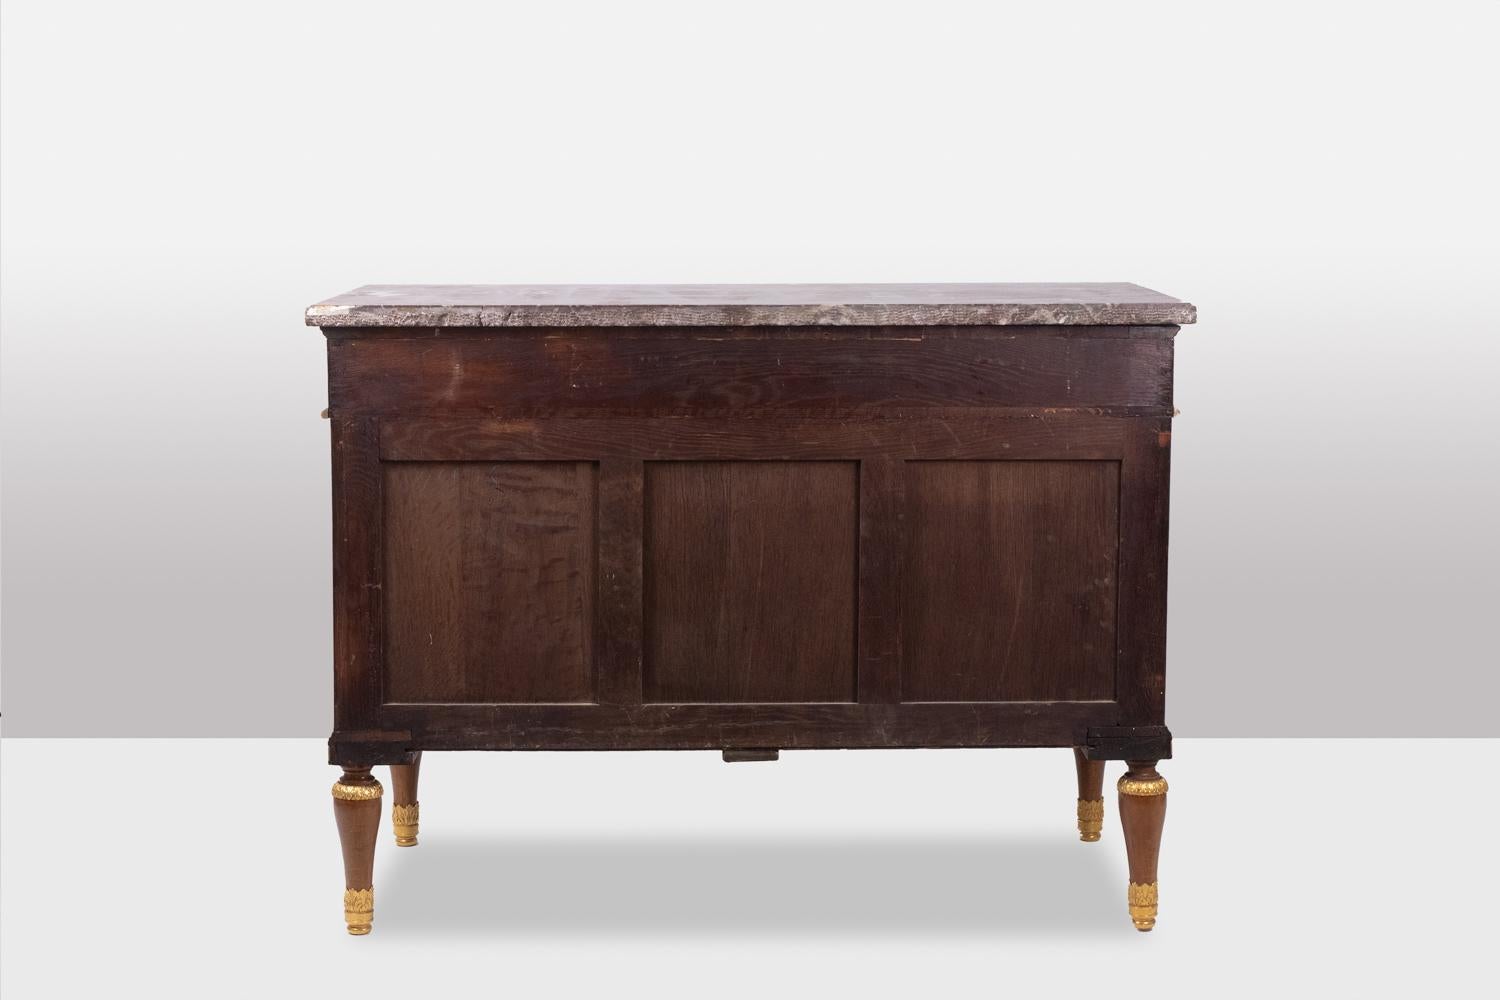 19th Century Empire style chest of drawers in lacquer, bronze and marble. Nineteenth century.